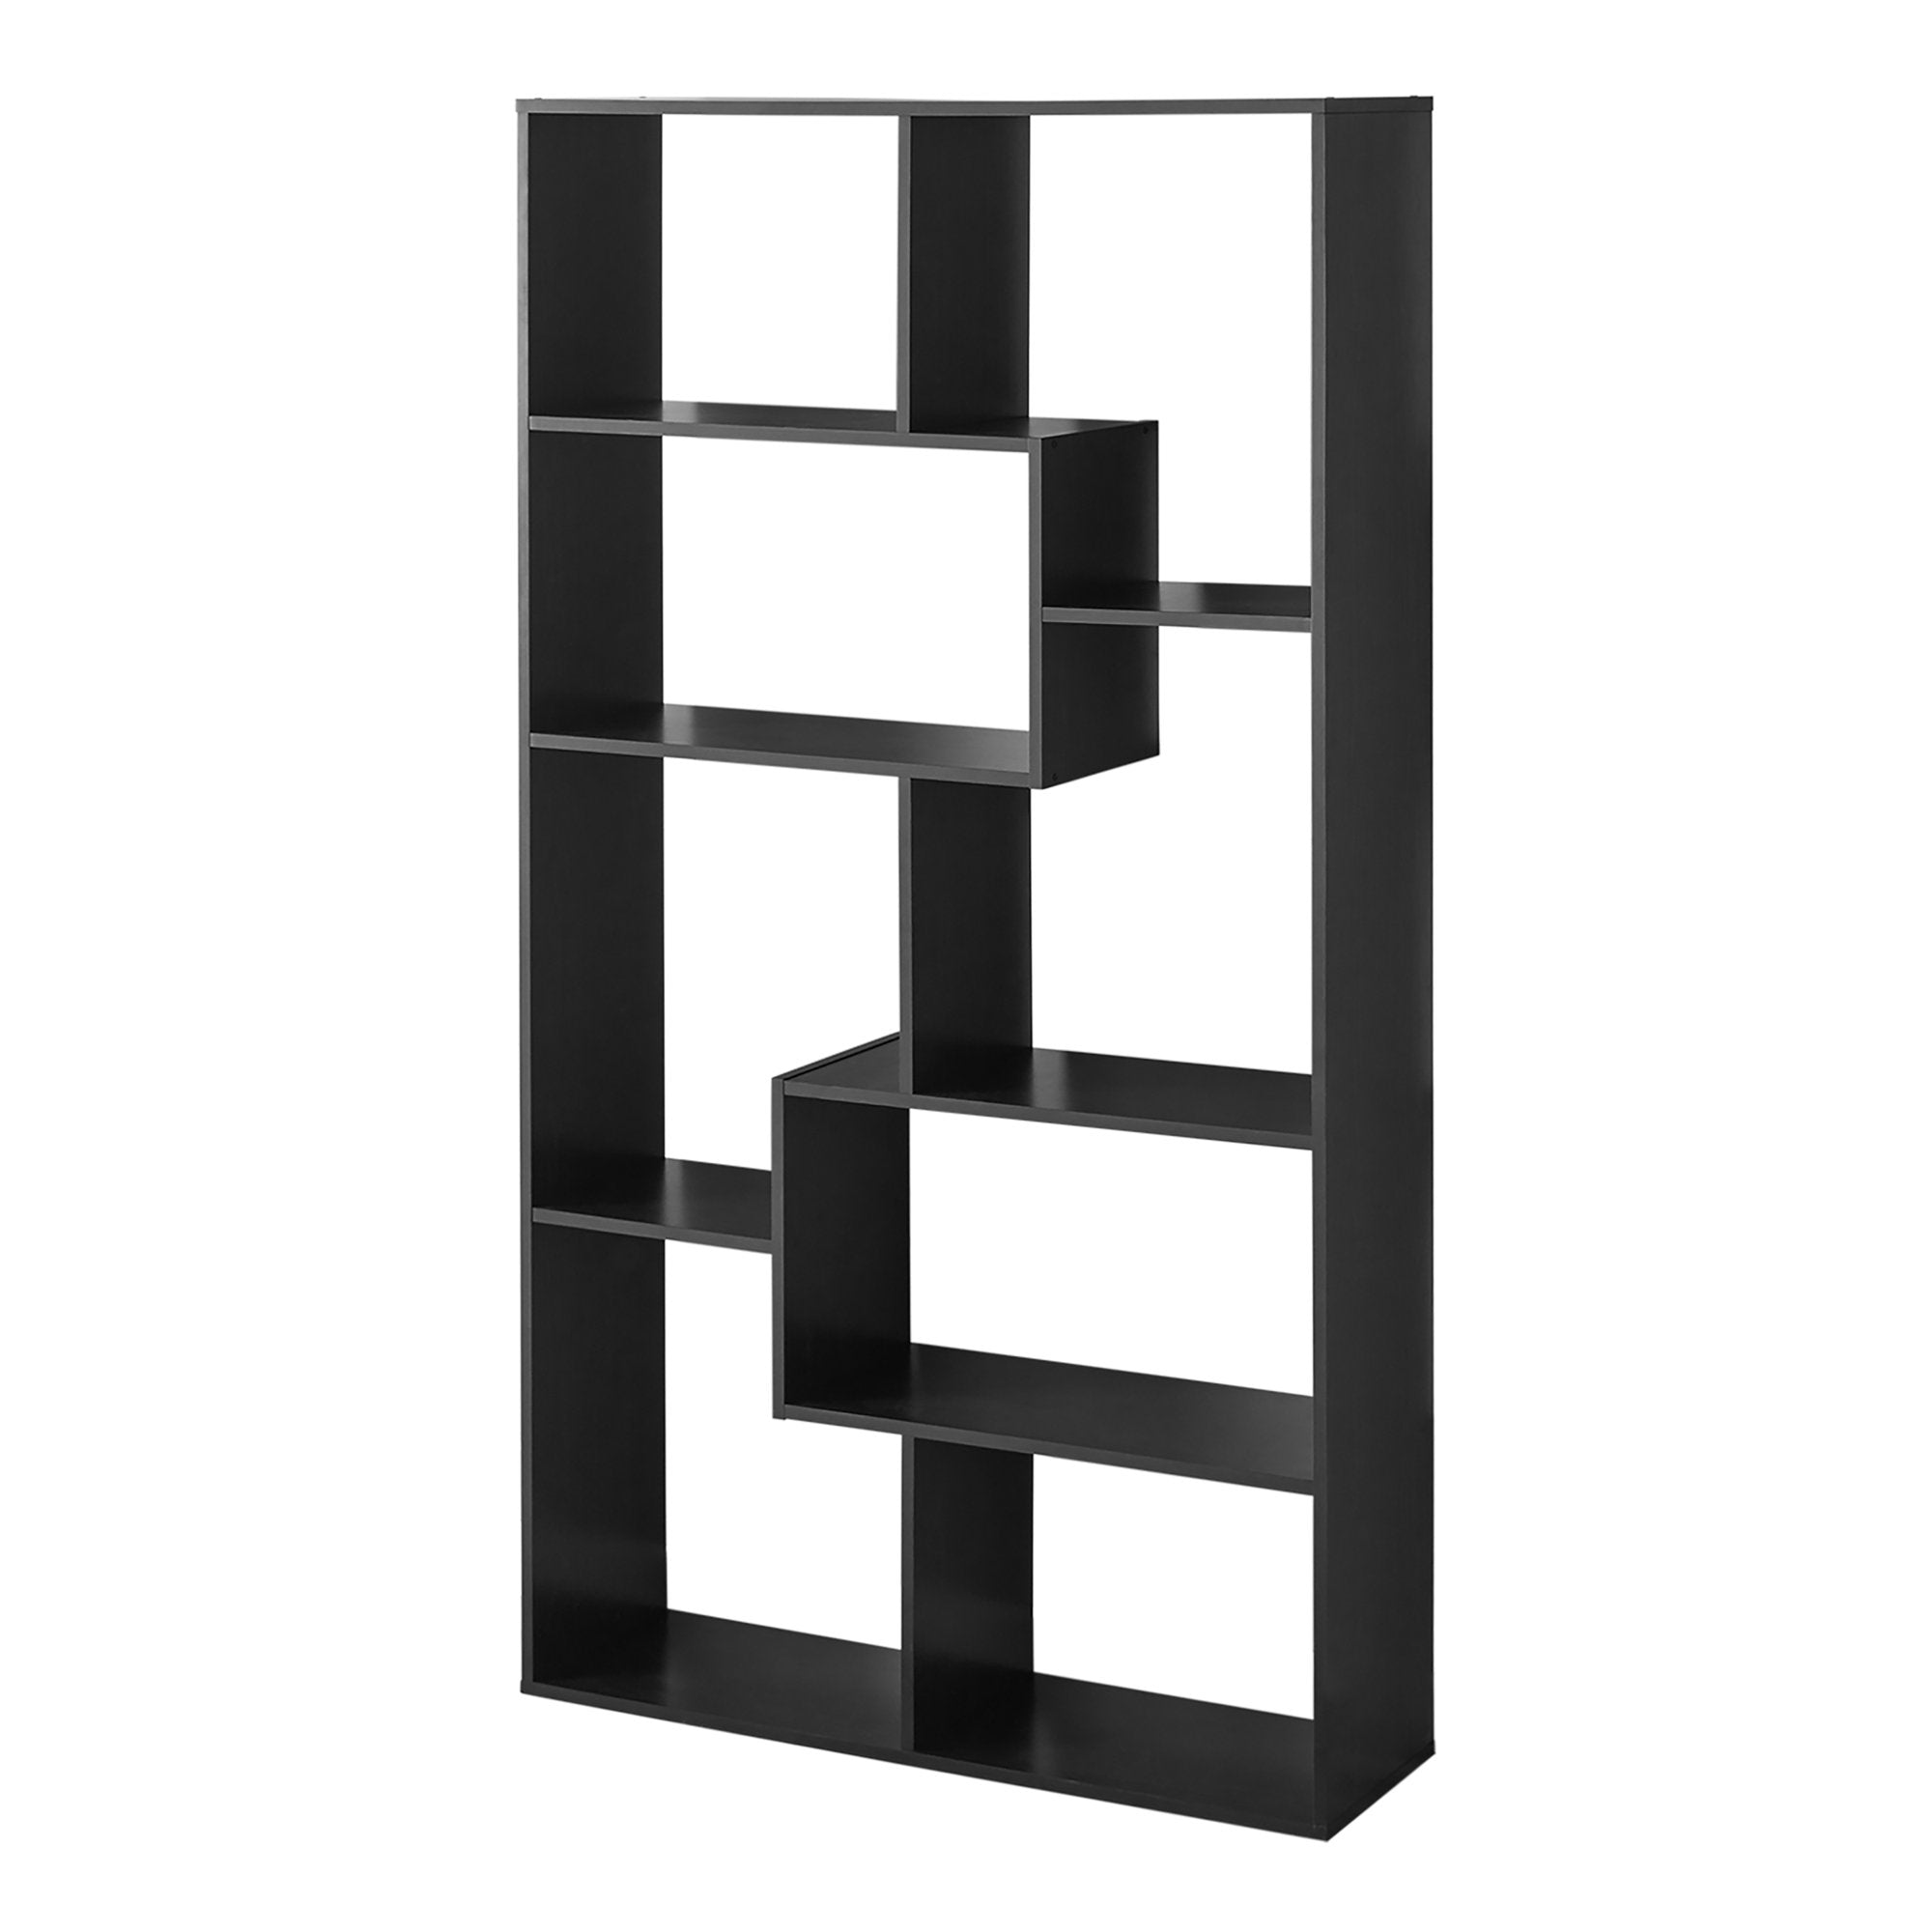 Tall Bookcase Cubby large Open Bookshelf Modern Cube 8 Shelf Display-Bookcases & Shelving-AULEY